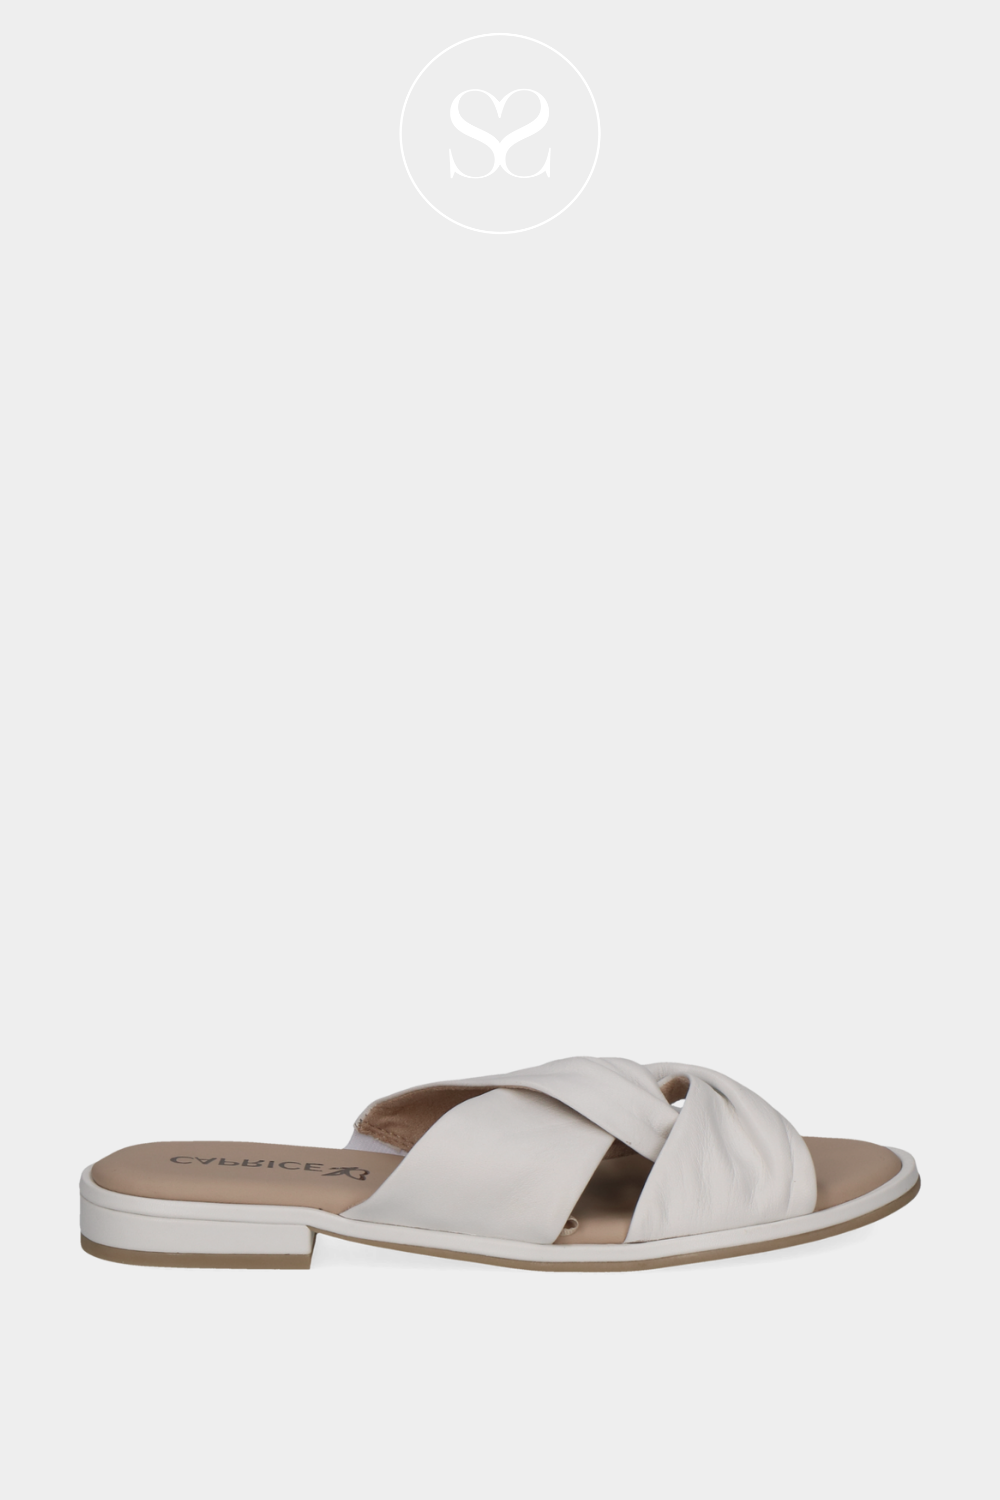 CAPRICE 9-27100-42 OFF WHITE SLIP ON SLIDER SANDALS WITH LEATHER CRISS CROSS STRAPS